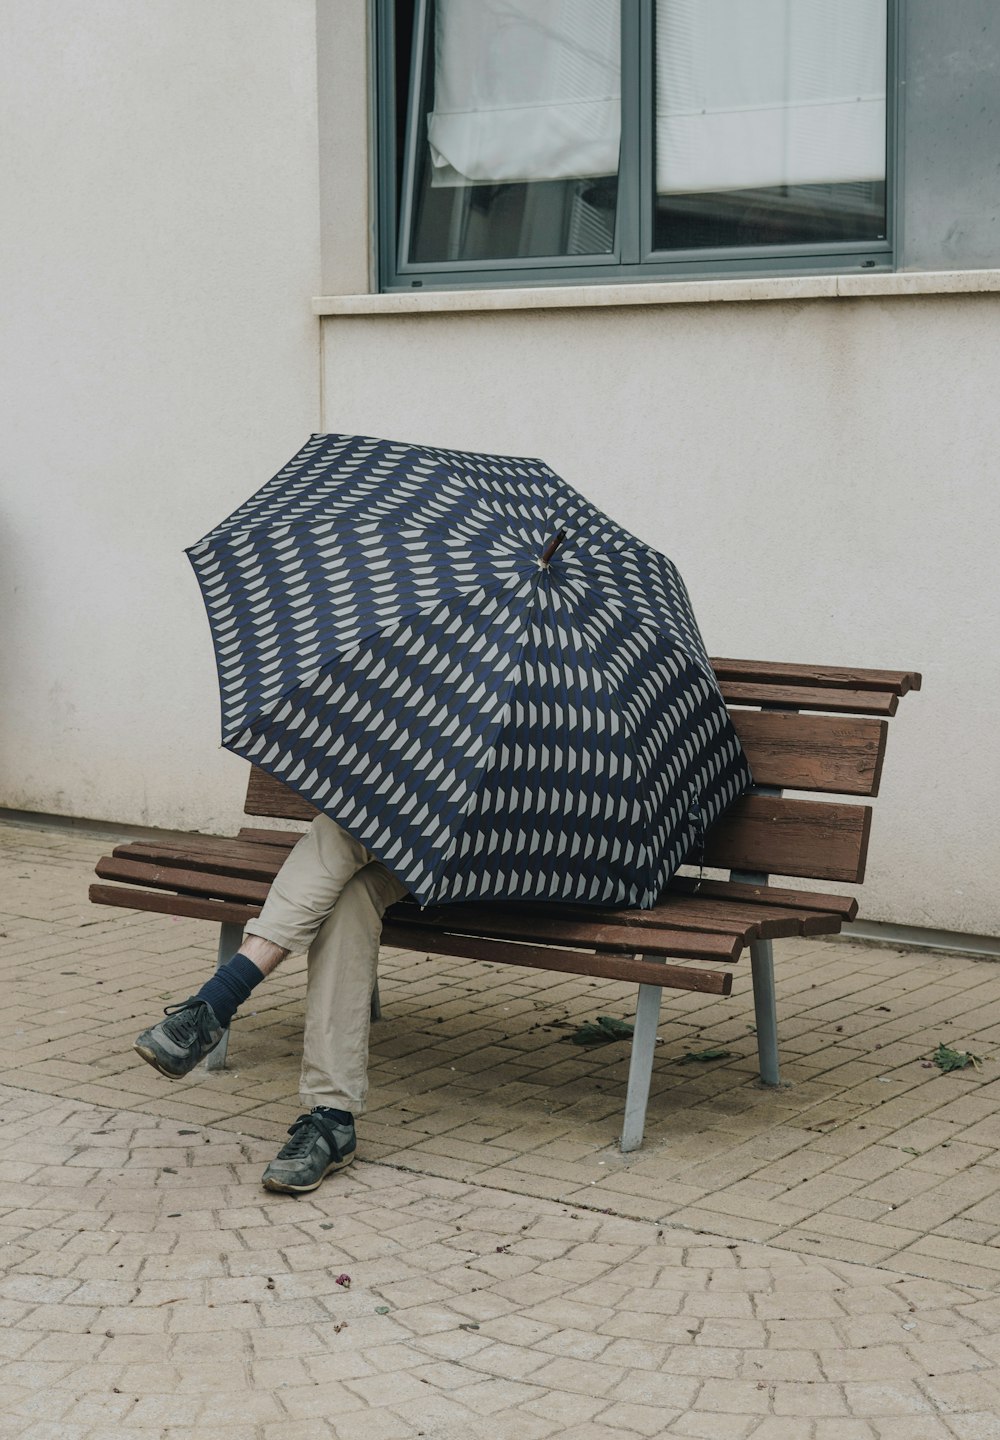 person in black and white polka dot umbrella sitting on brown wooden bench